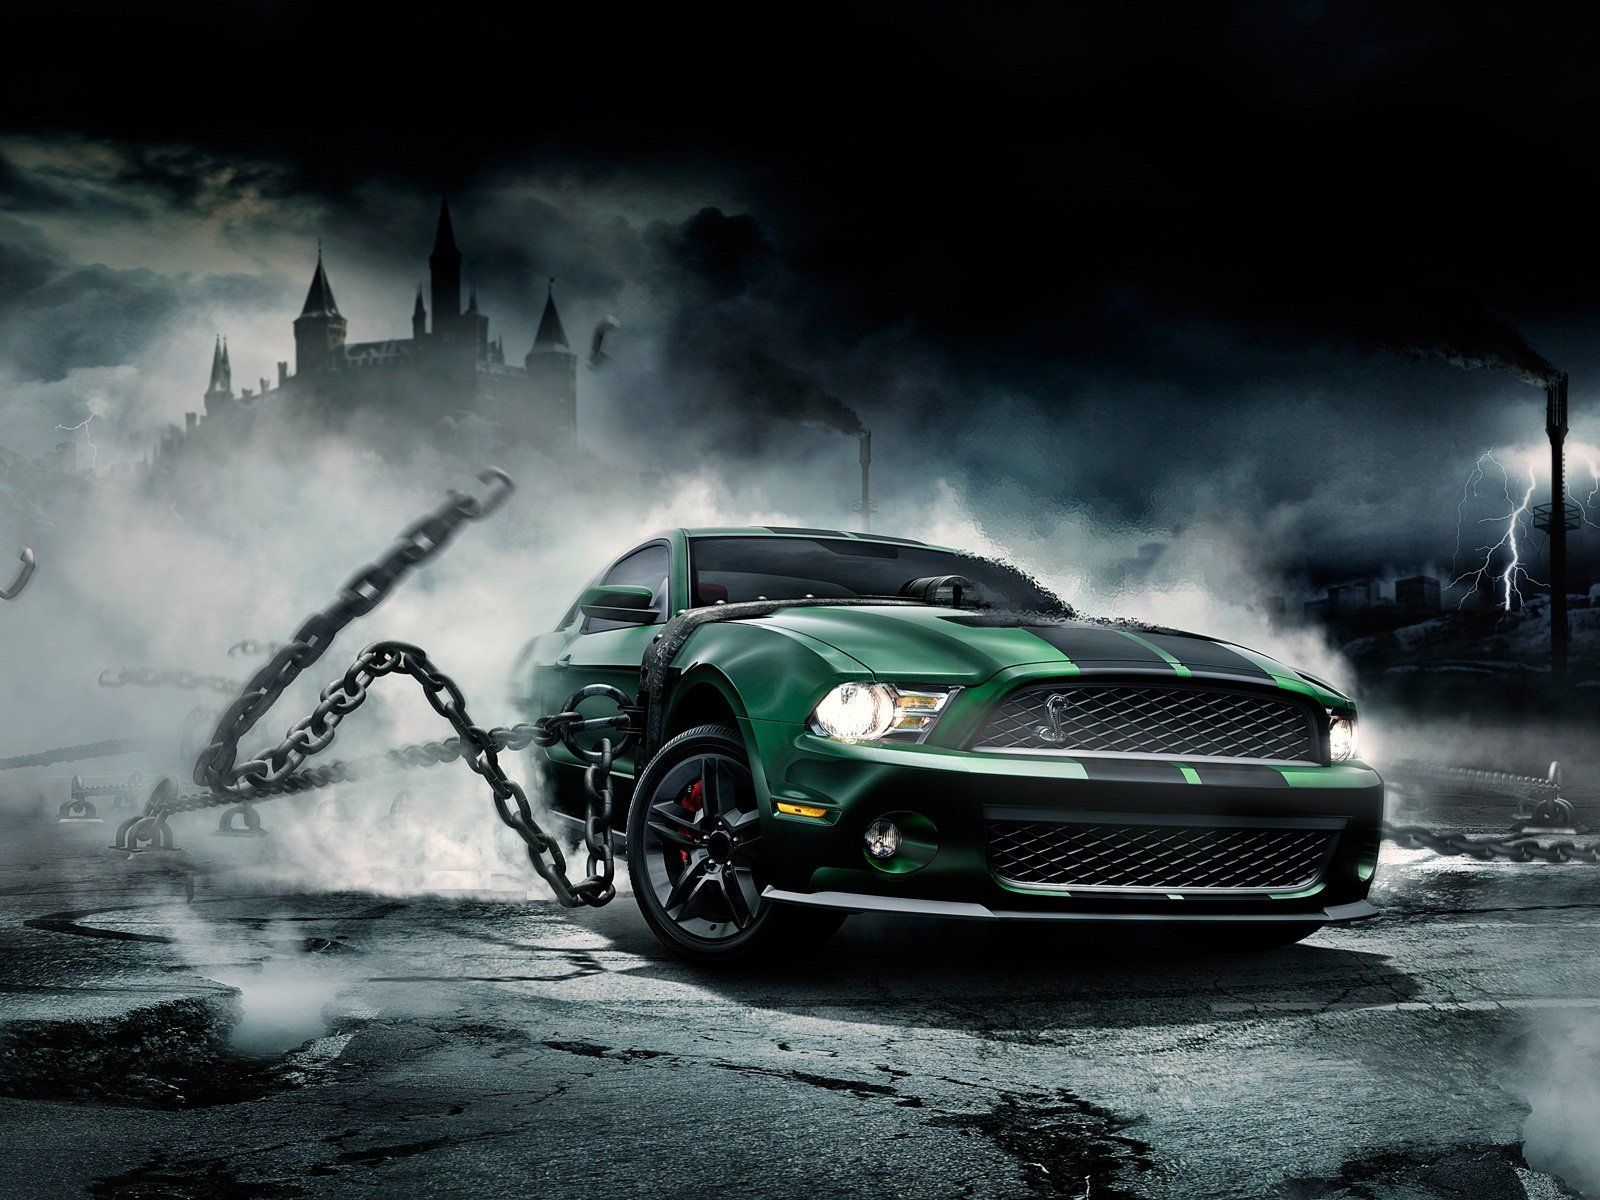 Free download wallpaper 1600x1200 HD car wallpaper Need For Speed